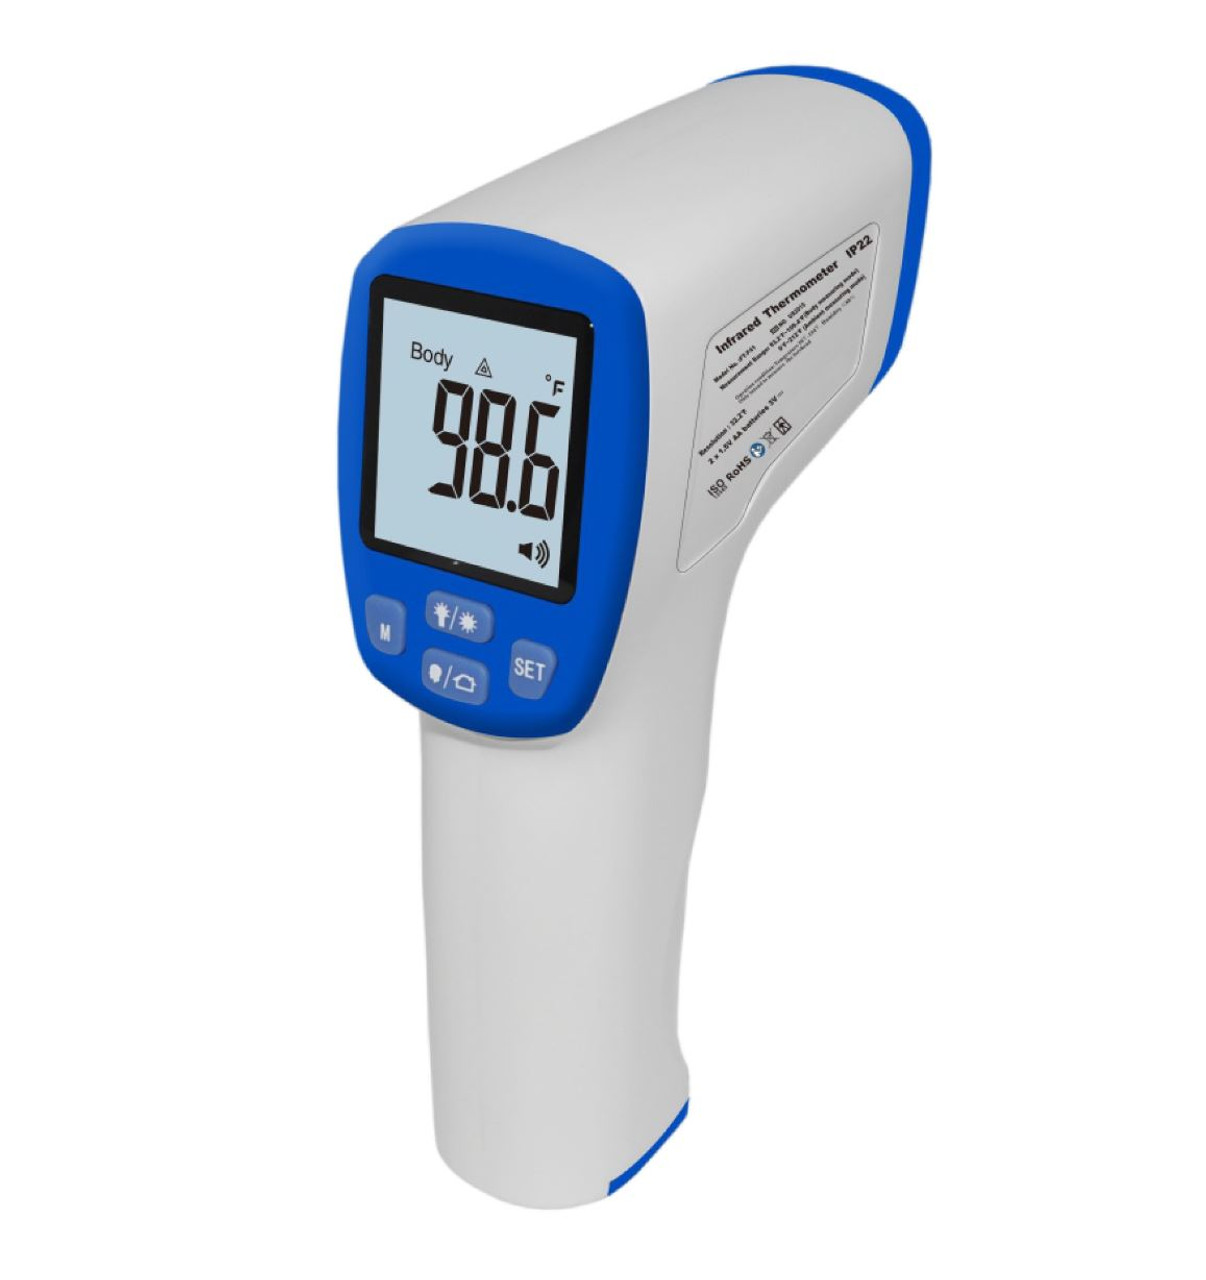 https://cdn11.bigcommerce.com/s-j599icwg8d/images/stencil/1280x1280/products/1673/1971/481109_infrared_thermometer__24122.1595437375.JPG?c=1